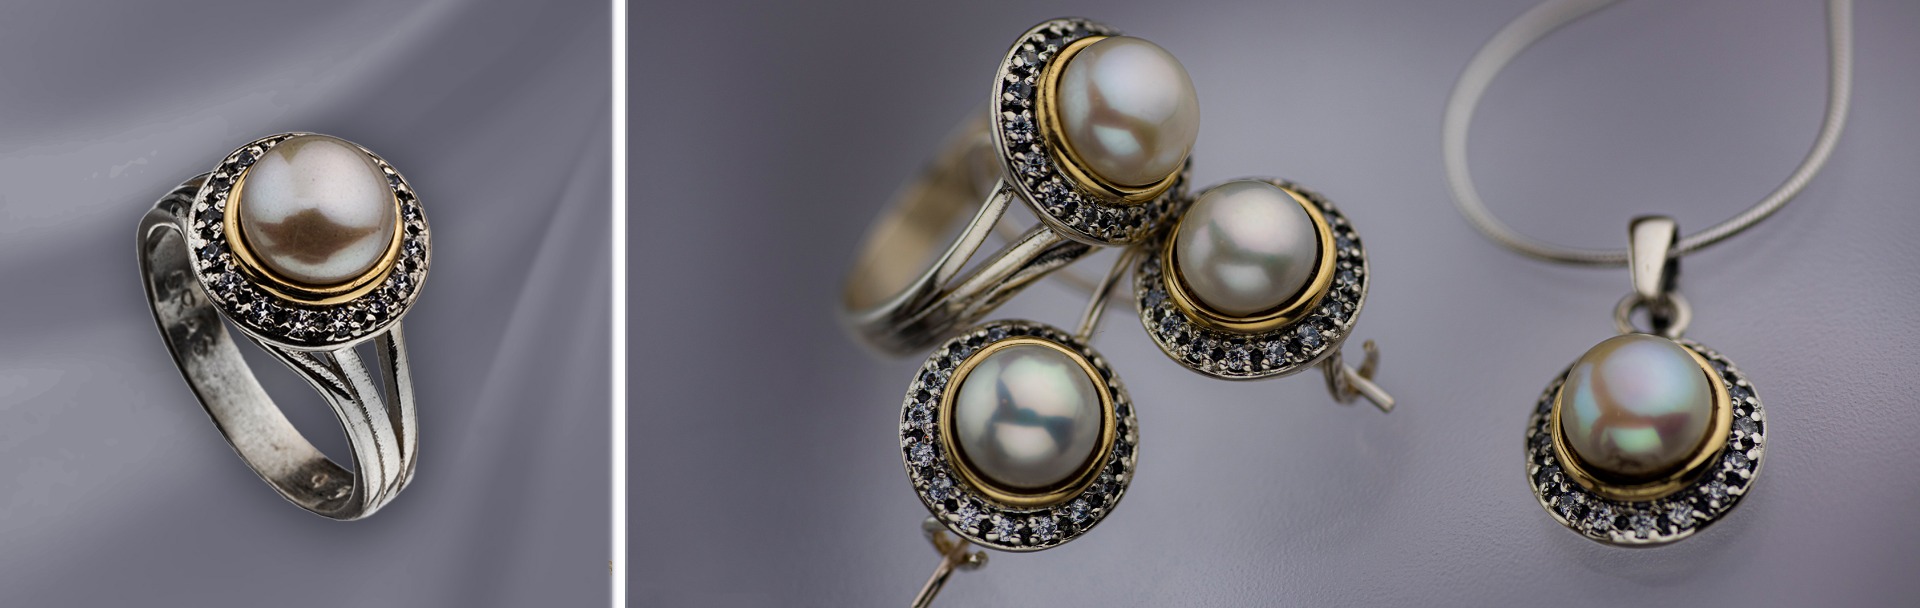 925 Sterling Silver & 9K Gold Jewelry with Pearl and Zircons